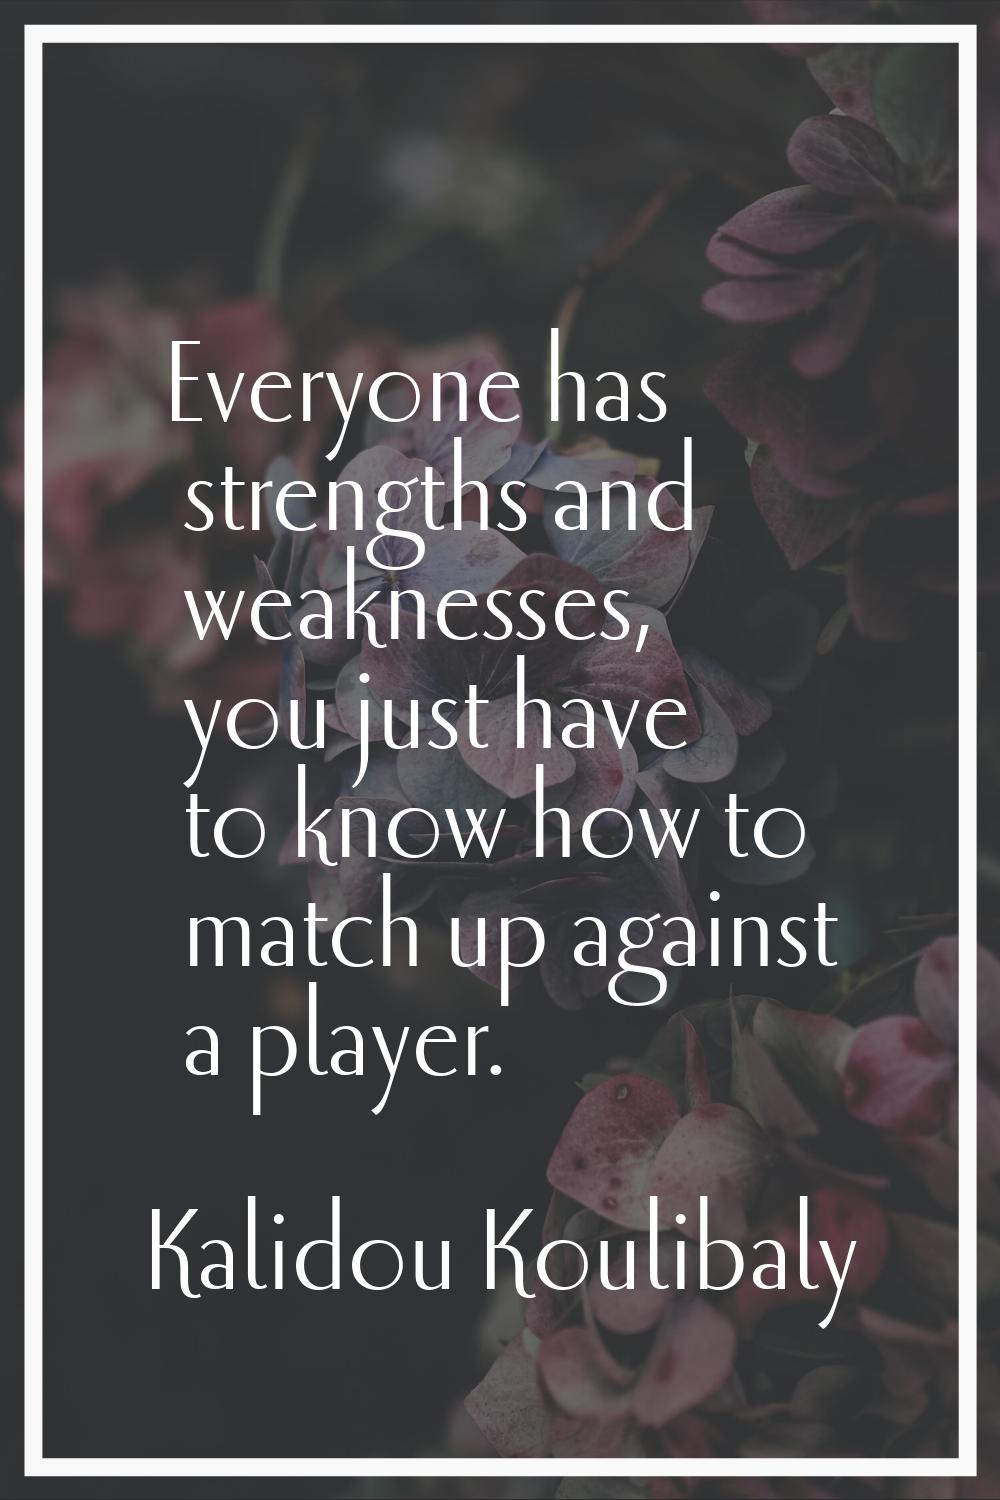 Everyone has strengths and weaknesses, you just have to know how to match up against a player.